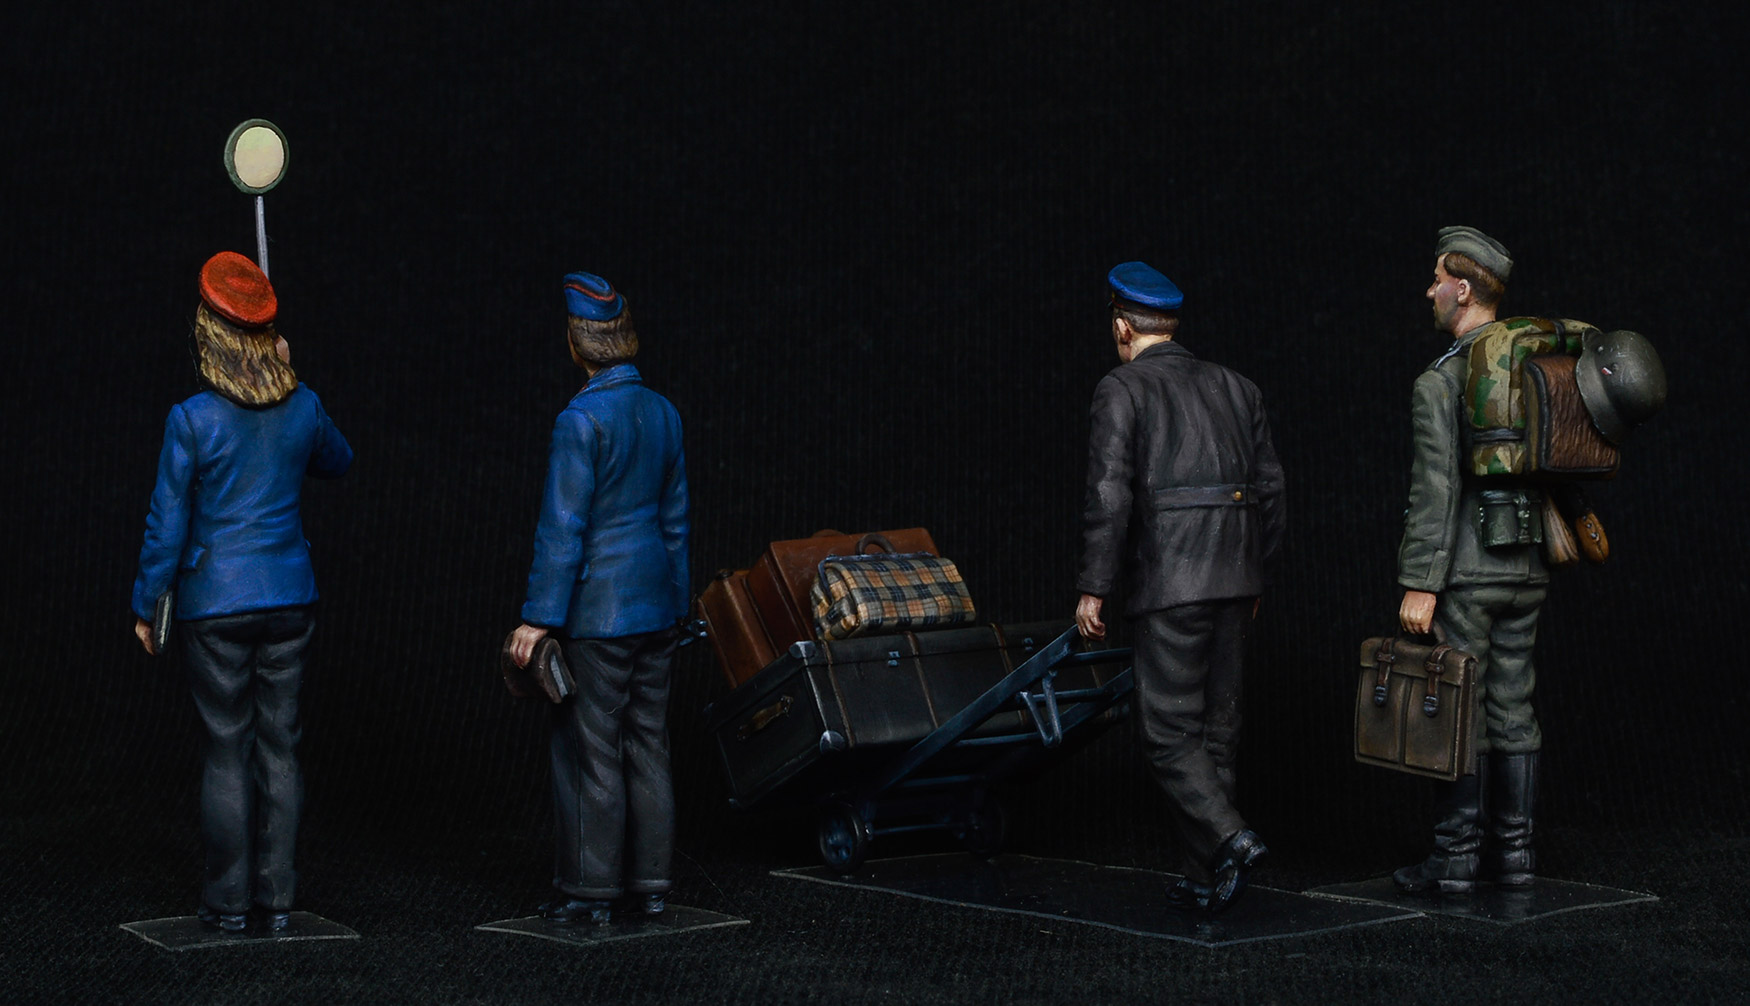 FREE SHIPPING 3 DAYS !!! Details about   1/35 MiniArt German Train Station Staff 1940  $$$ 